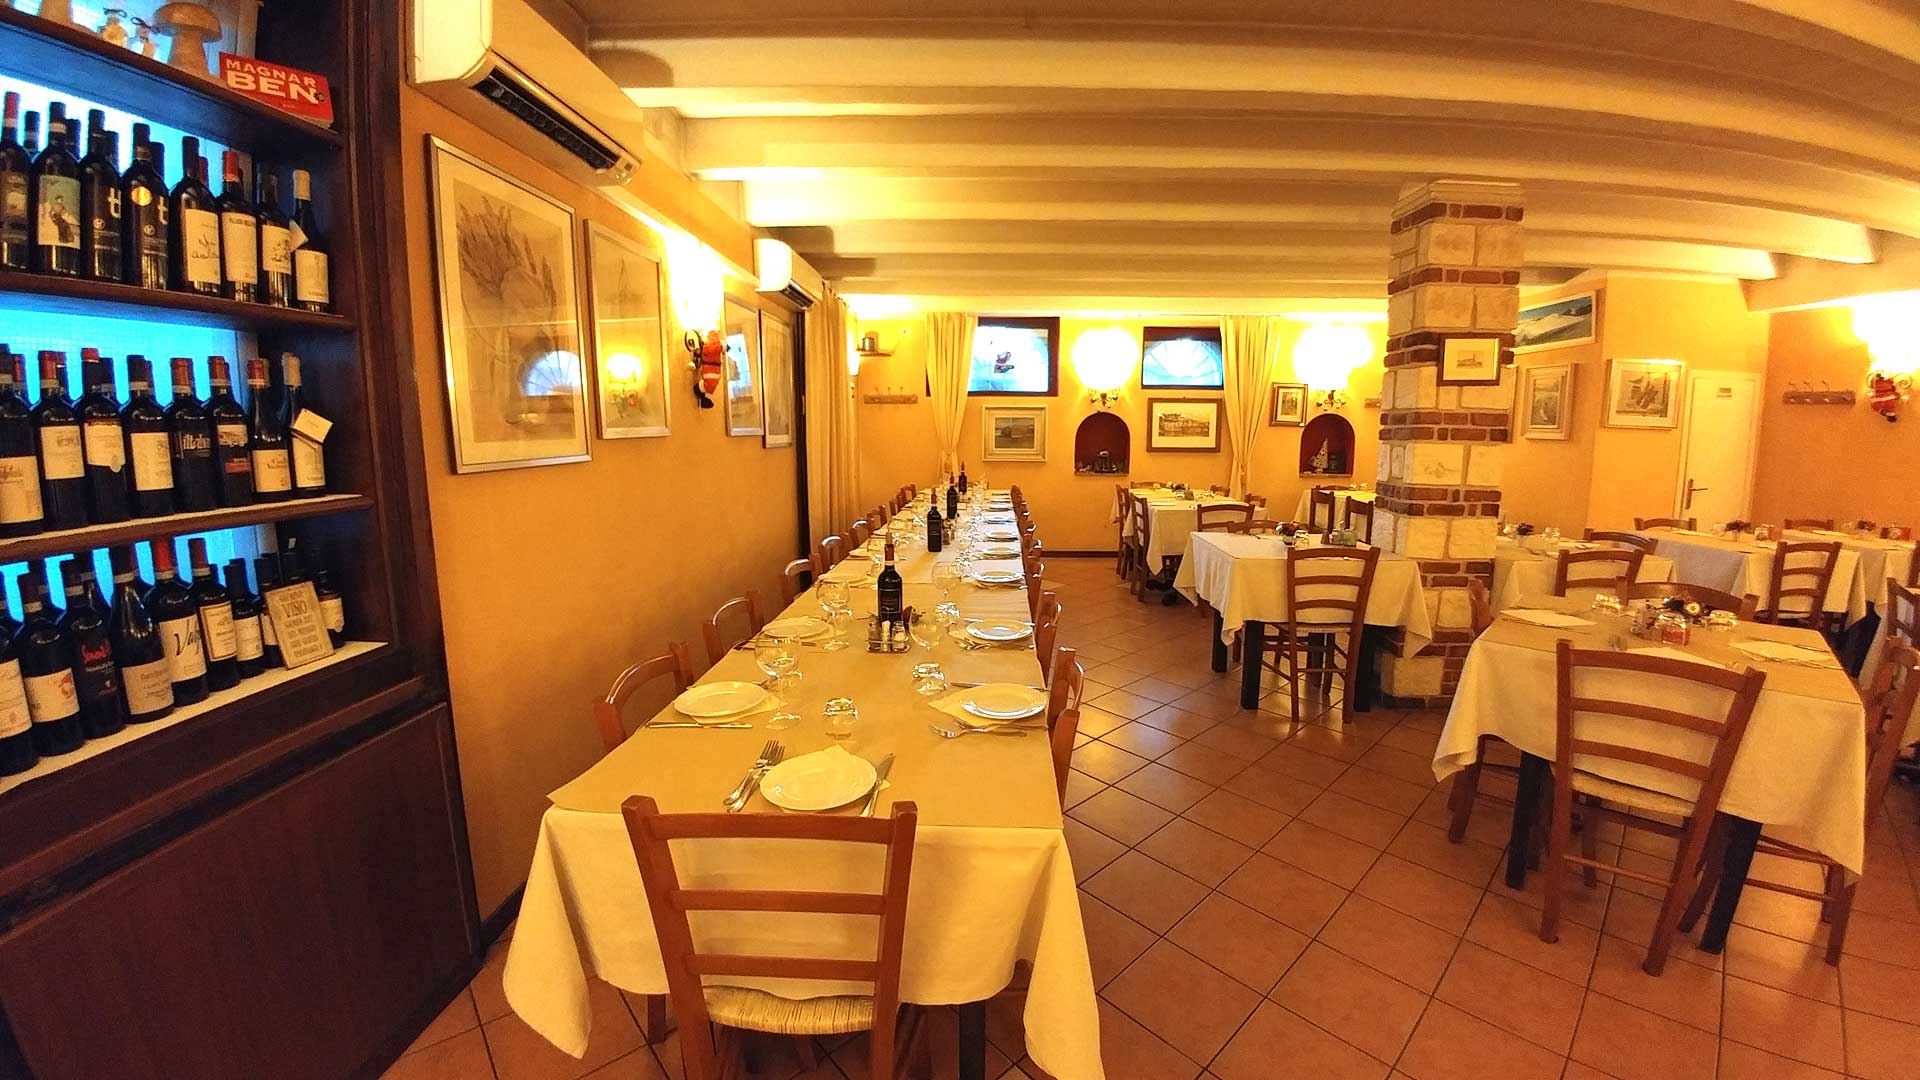 Top 5 restaurants of Verona with divine food and low prices